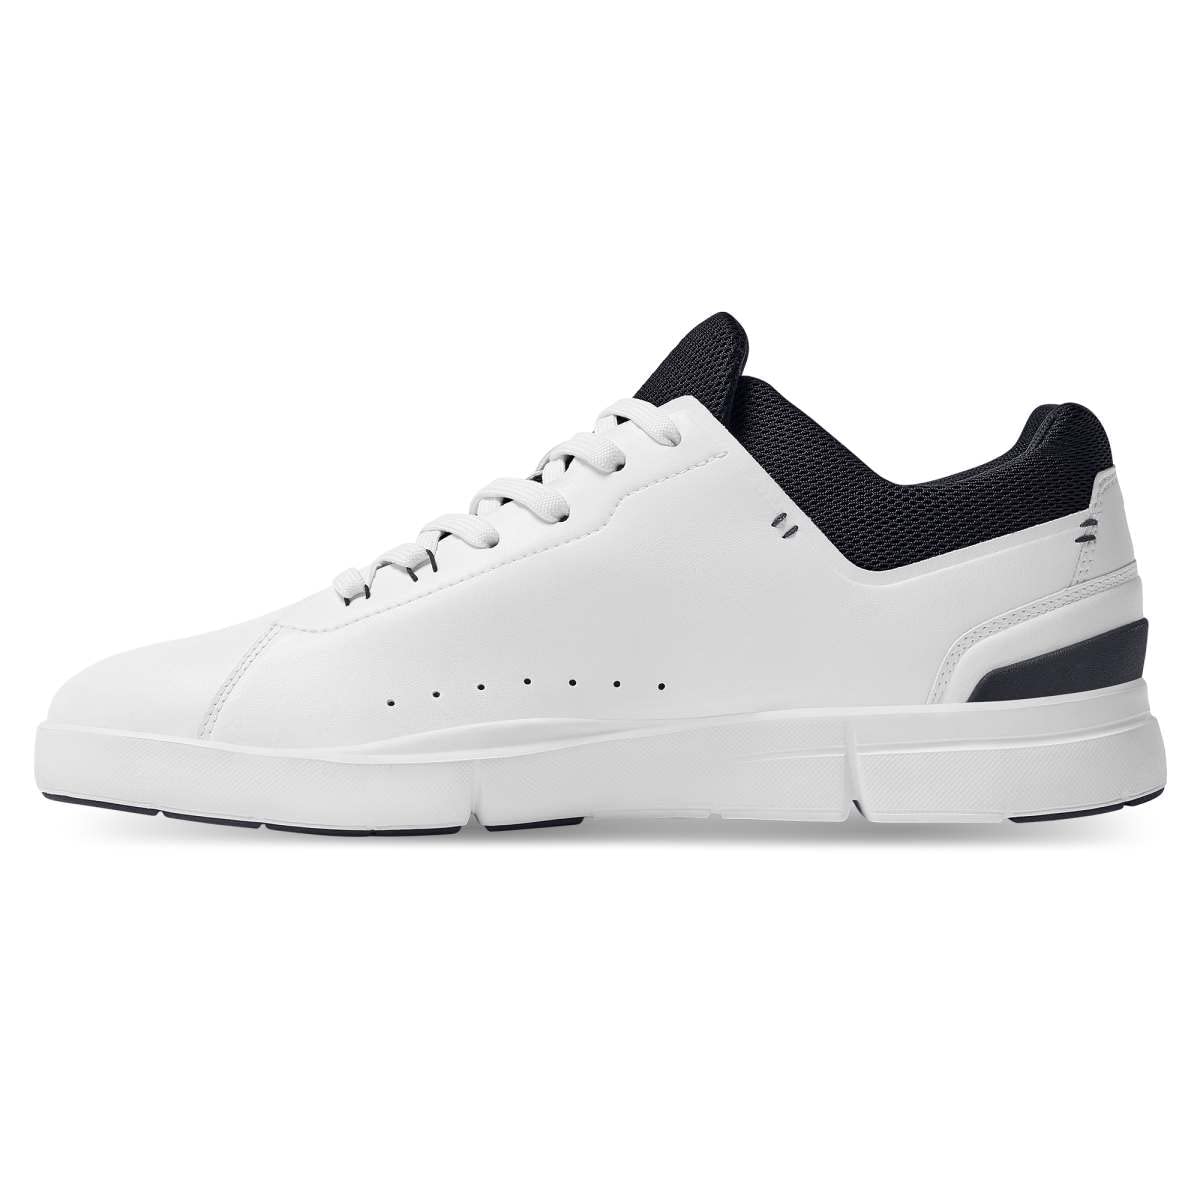 On Men's The Roger Advantage Sneakers